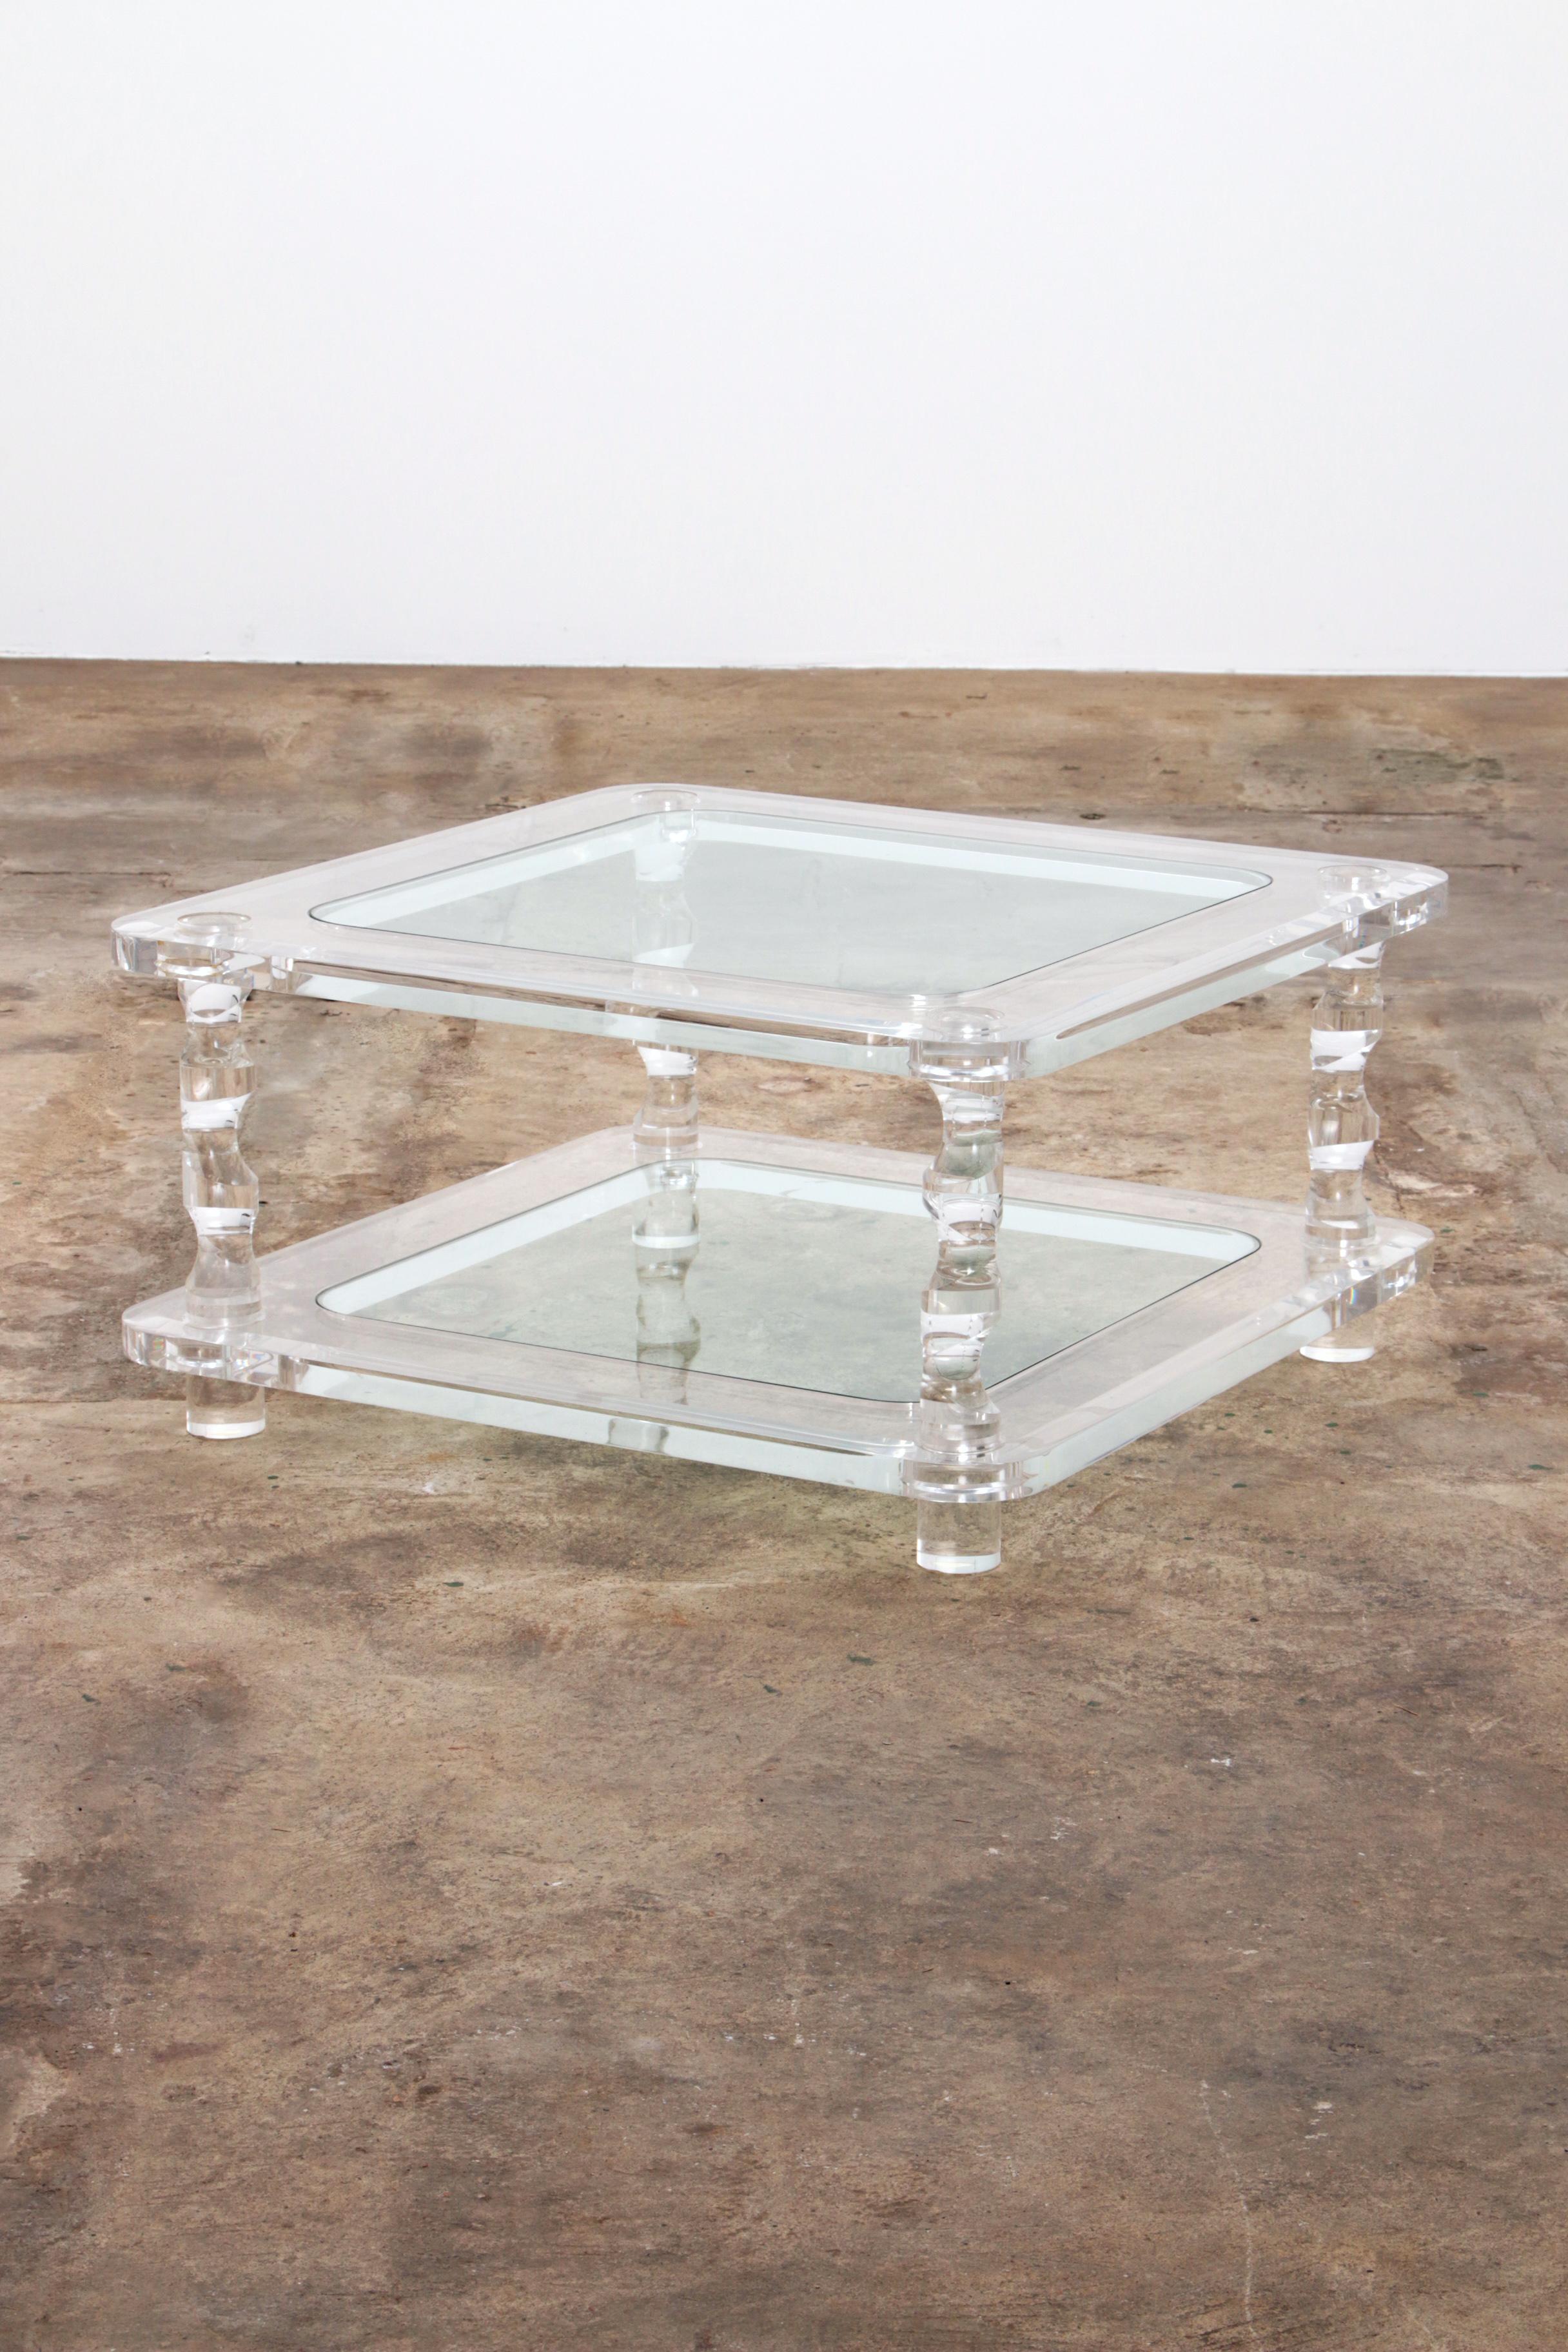 
A beautiful coffee table in Lucite structure and glass from the French design house Maison Romeo. The table was produced around the 1970s and the design has a modern and stylish look.

The table consists of two beautiful clear glass plates. All